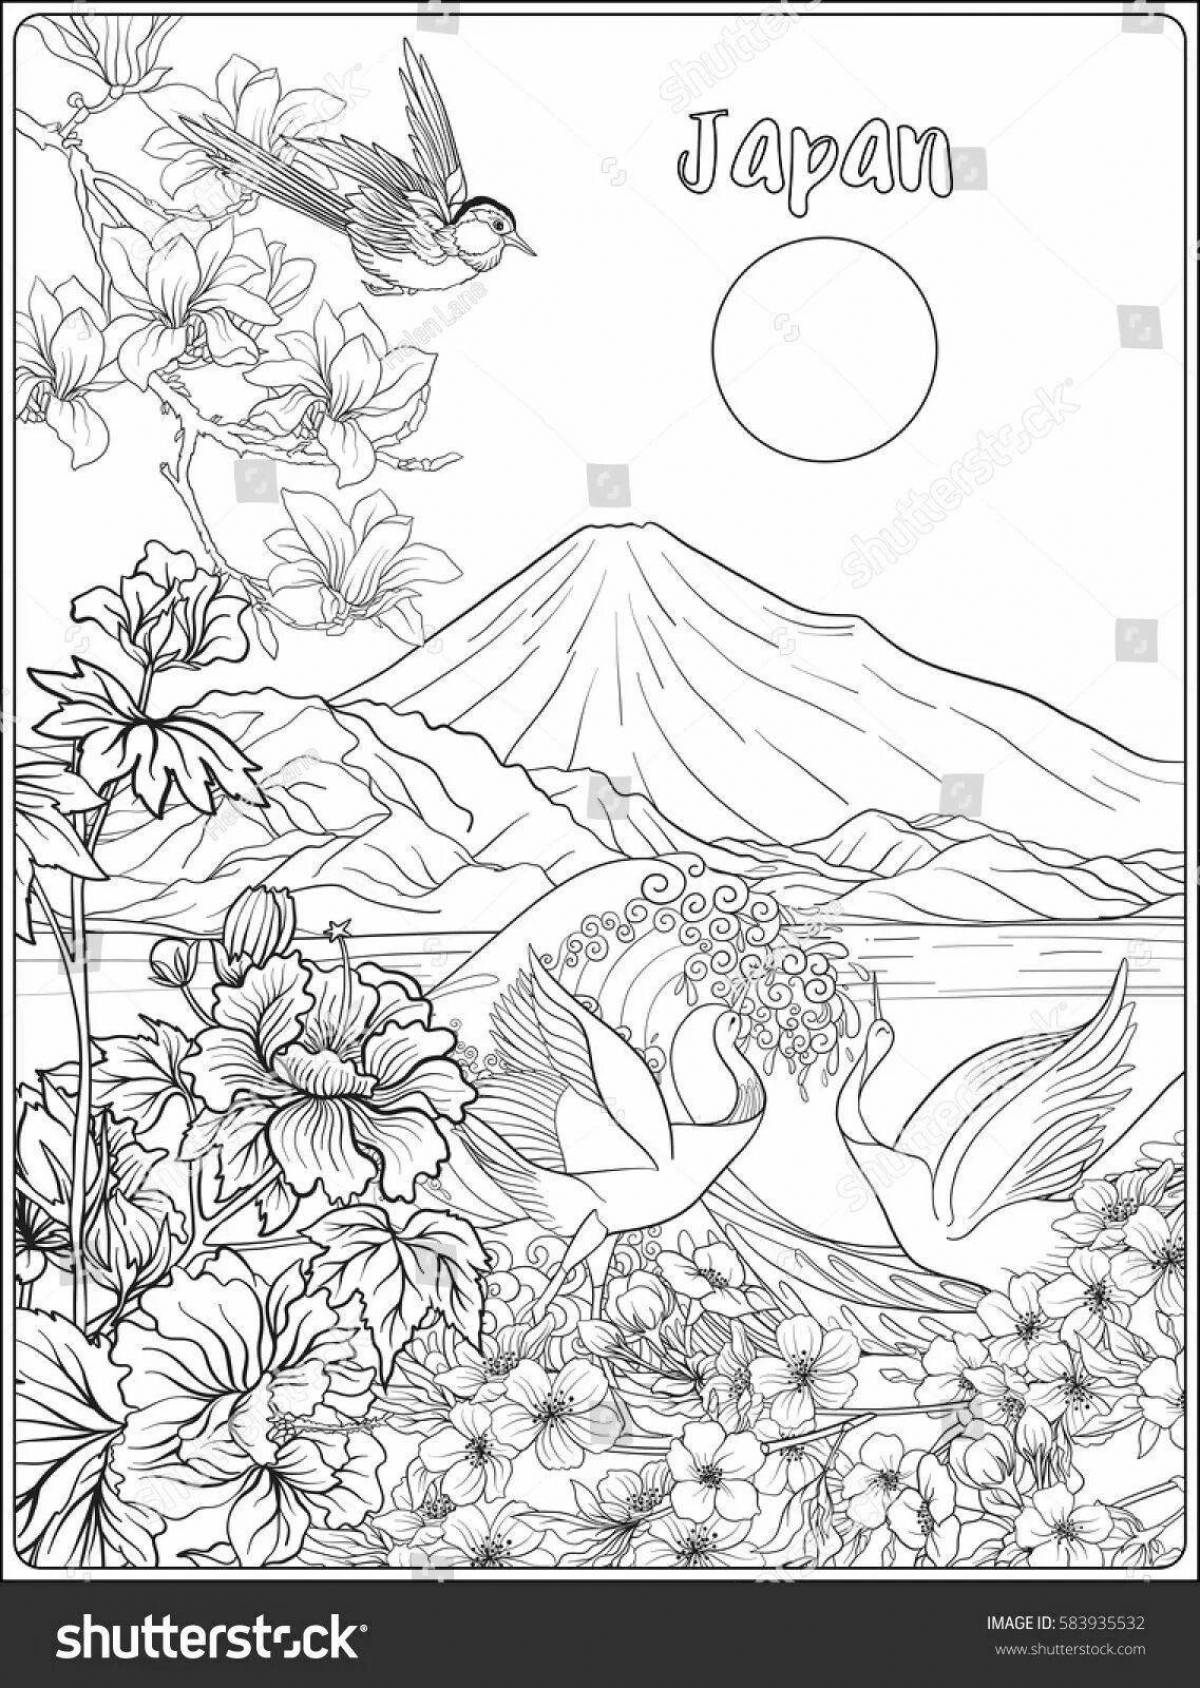 Vibrant coloring page of the Japanese landscape